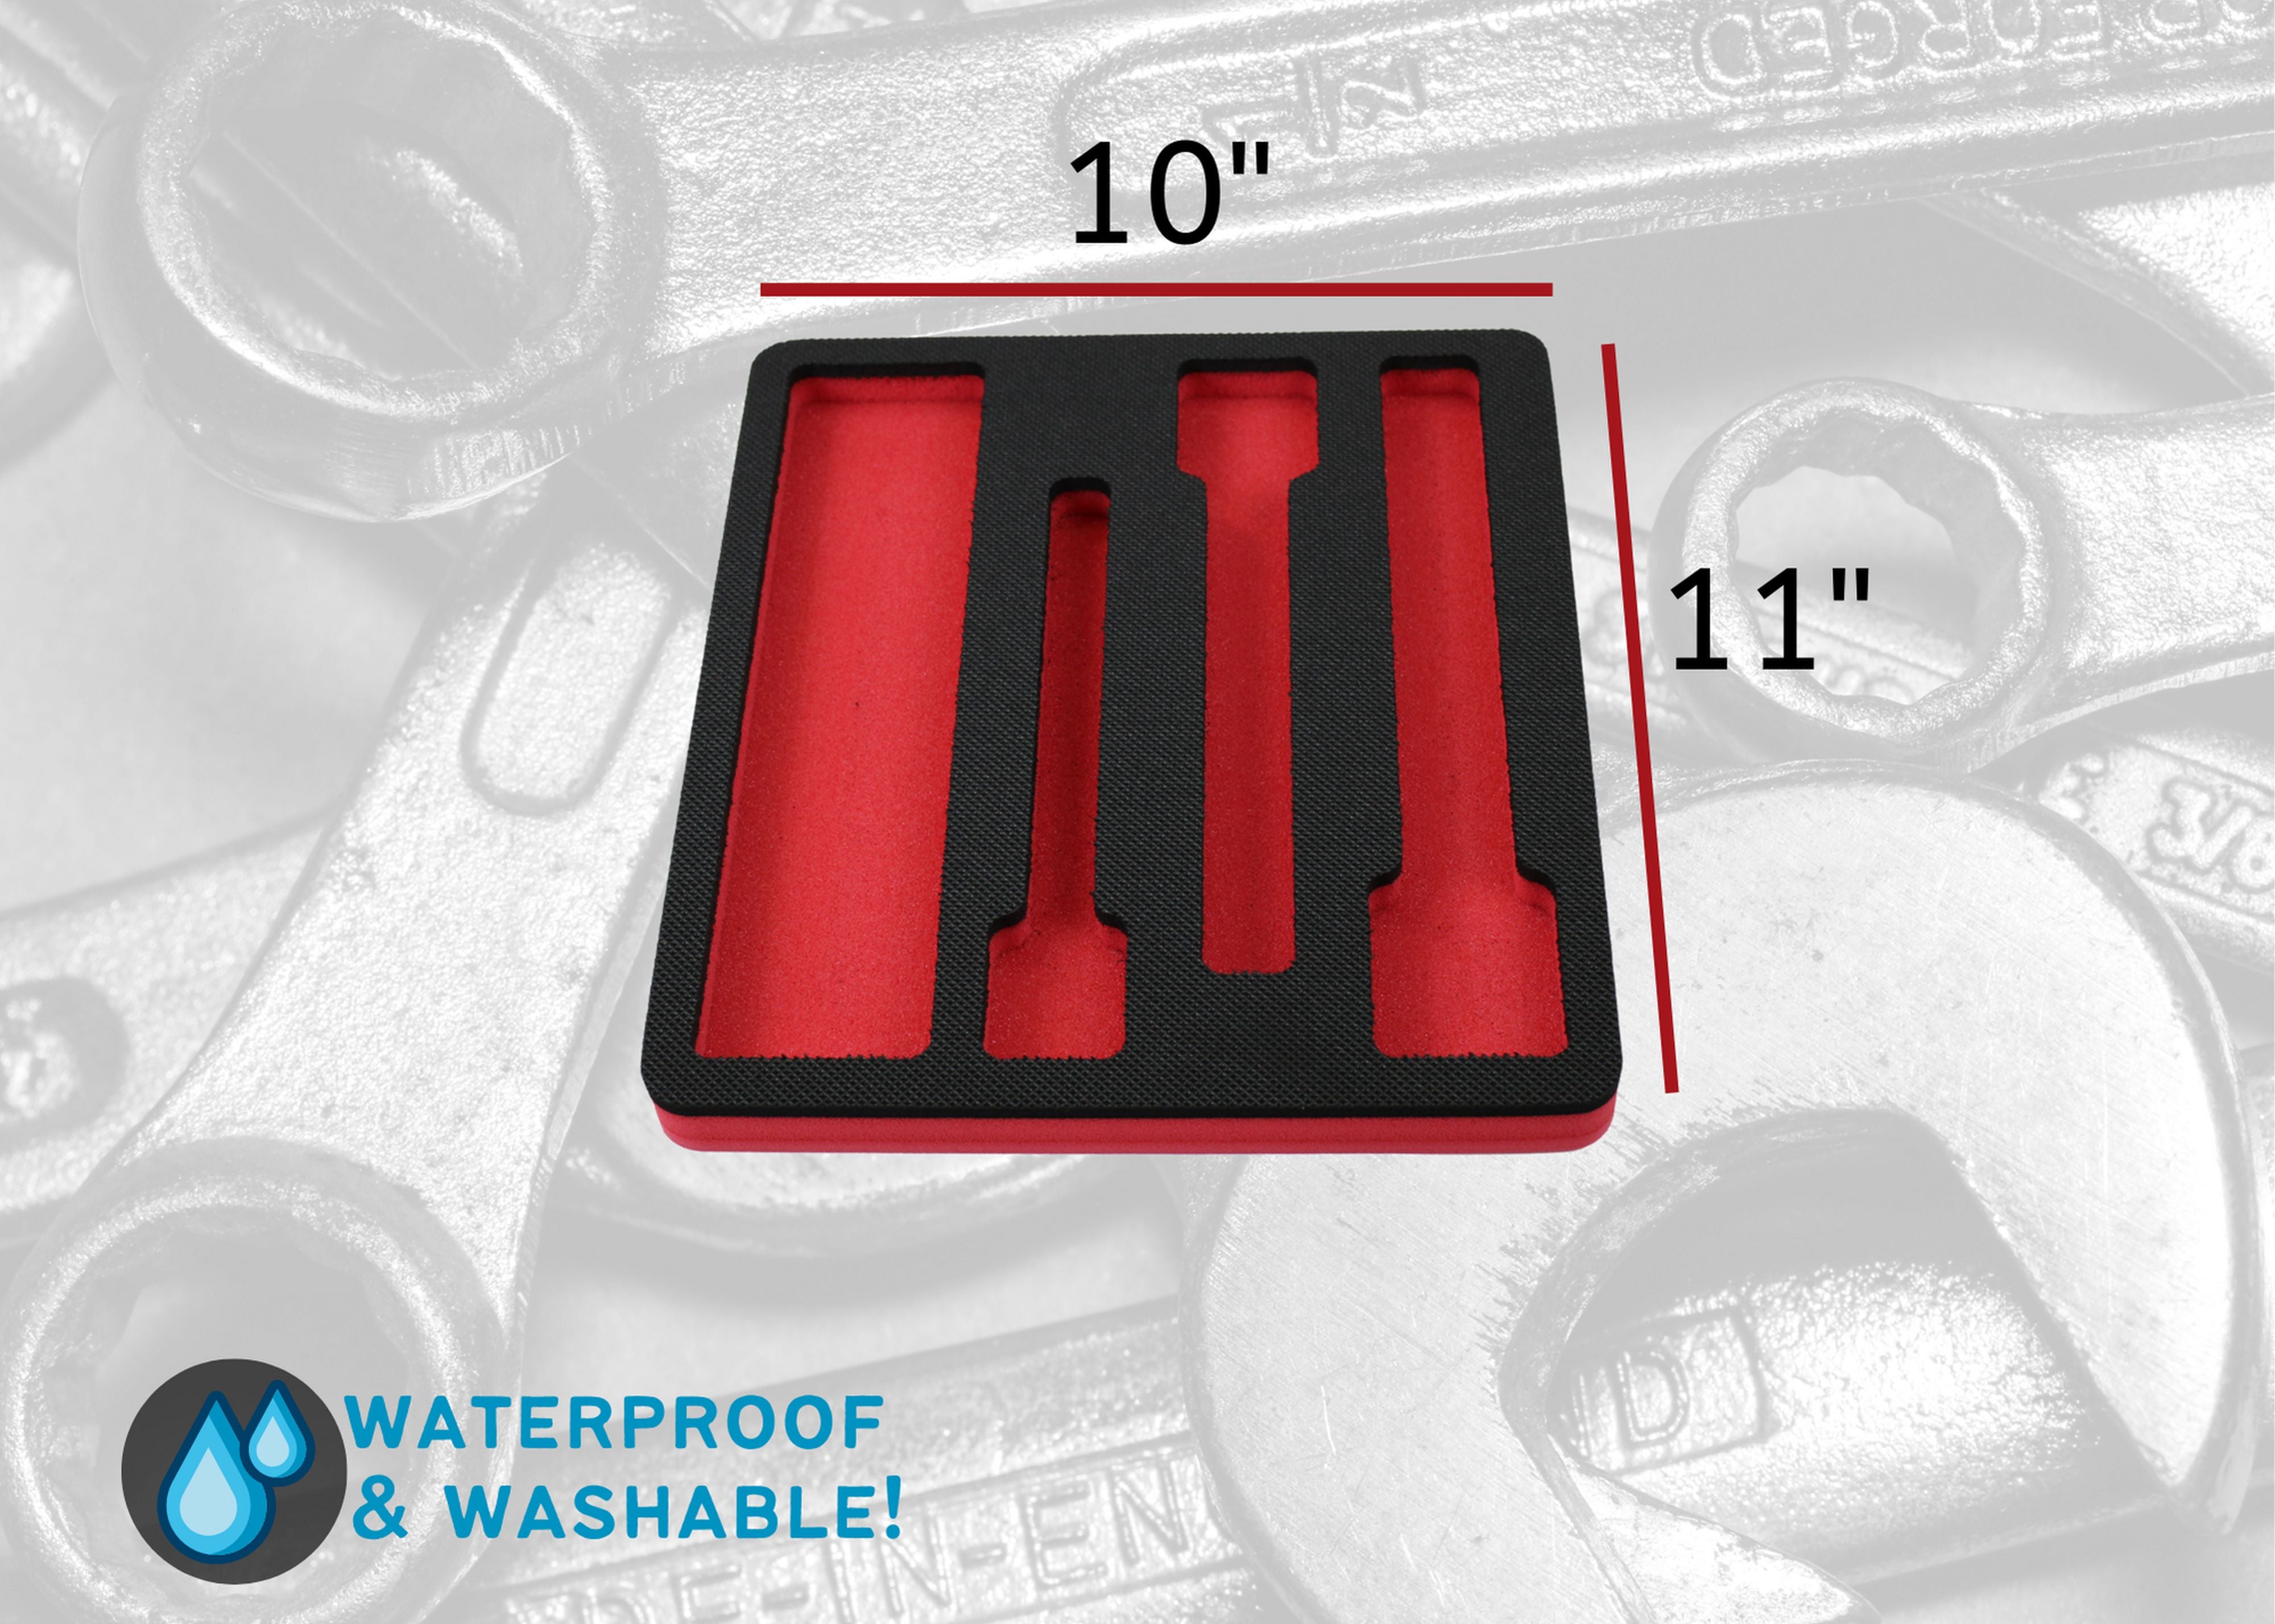 Tool Drawer Organizer Ratchet Socket Wrench Holder Insert Red Black Durable Foam Tray Holds 3 Ratchets or Extensions Up To 10 Inches Long Fits Craftsman Husky Kobalt Milwaukee Many More